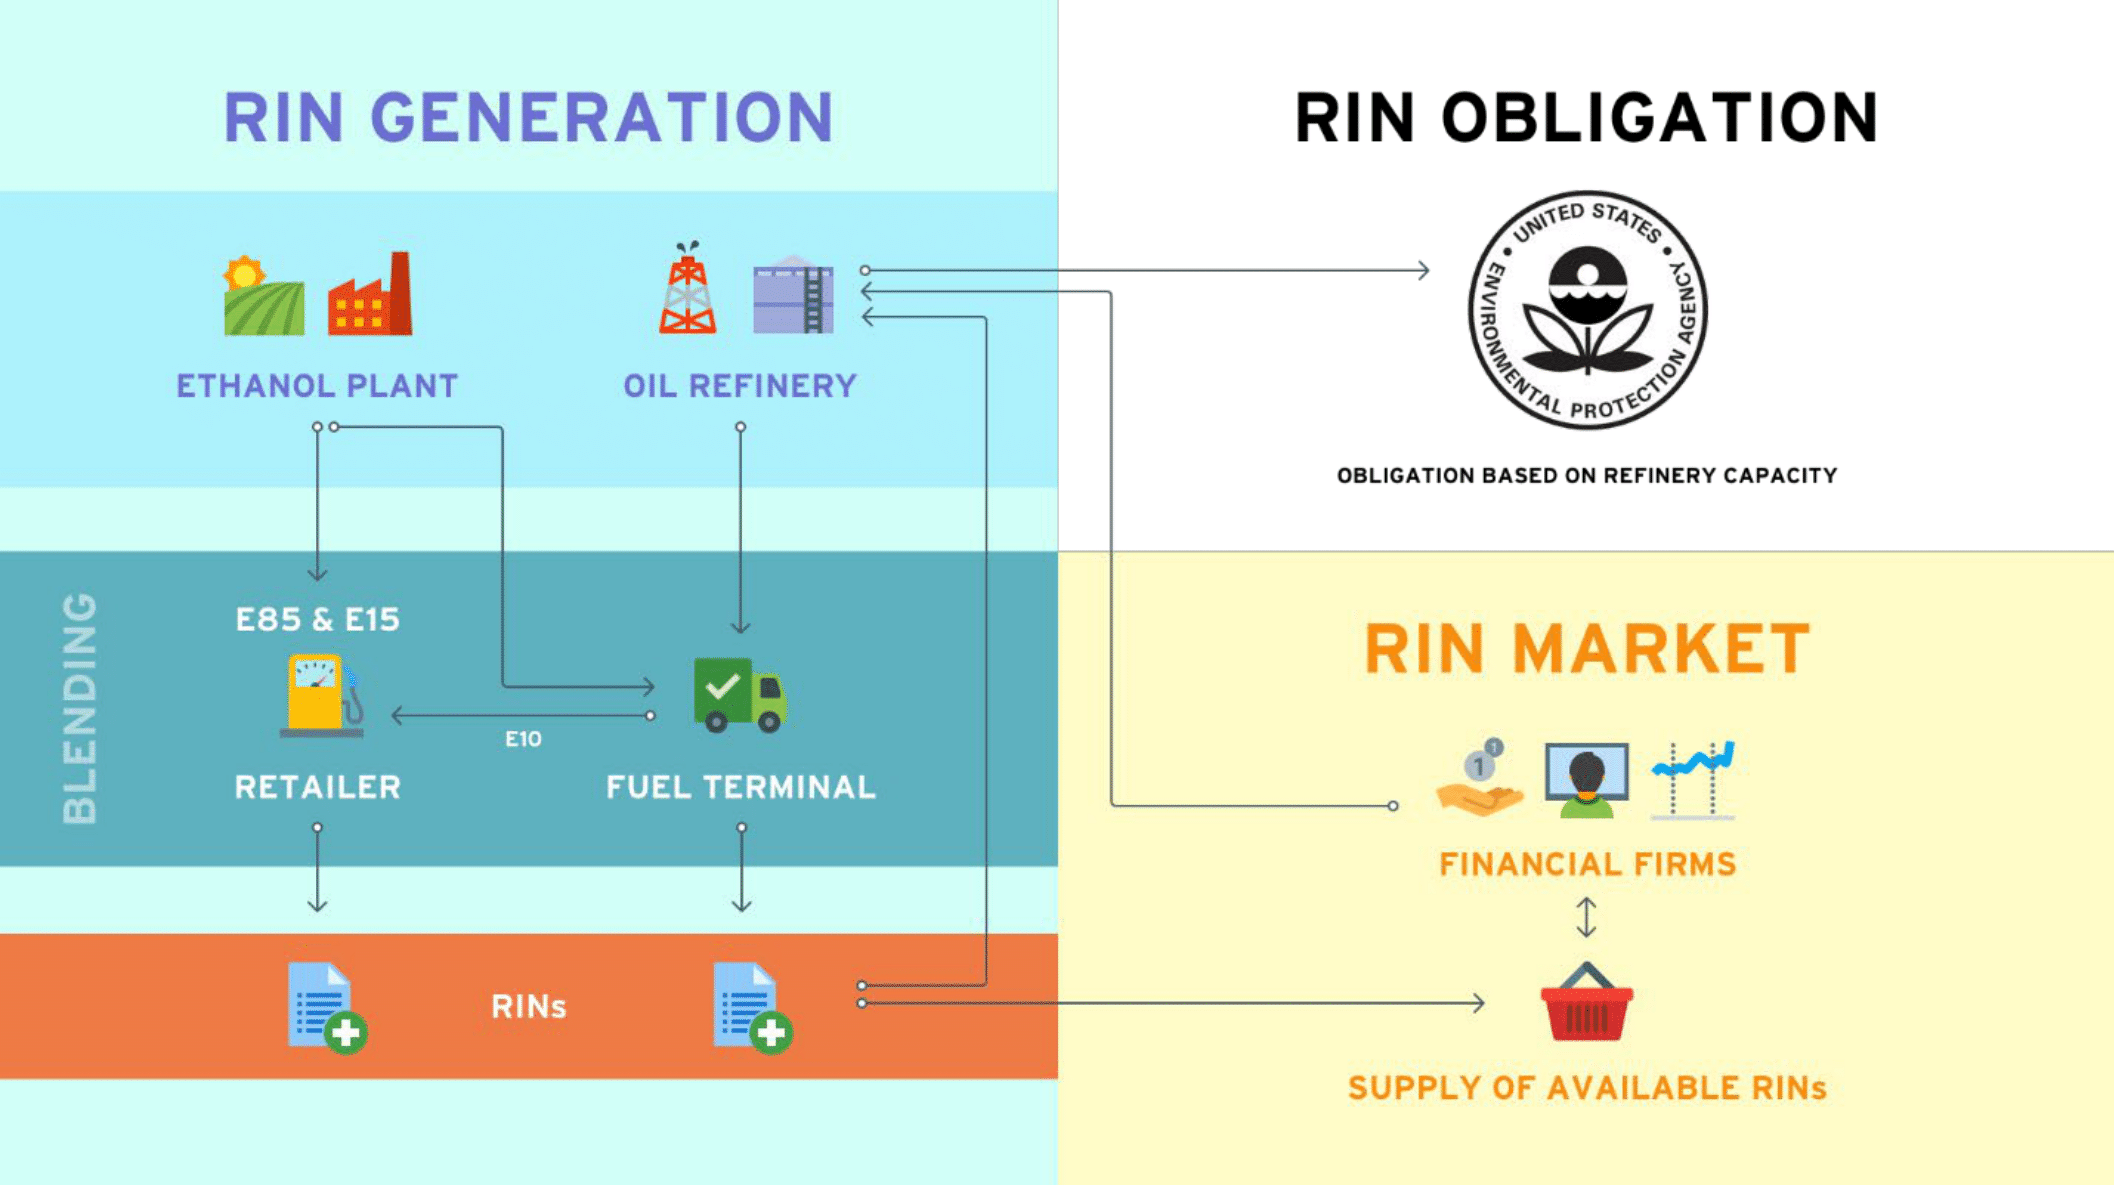 A chart explaining how Renewable Identification Numbers (RINs) work under the Renewable Fuel Standard (RFS), which stipulates how much renewable fuel refineries are required to blend into their fuel mix each year.